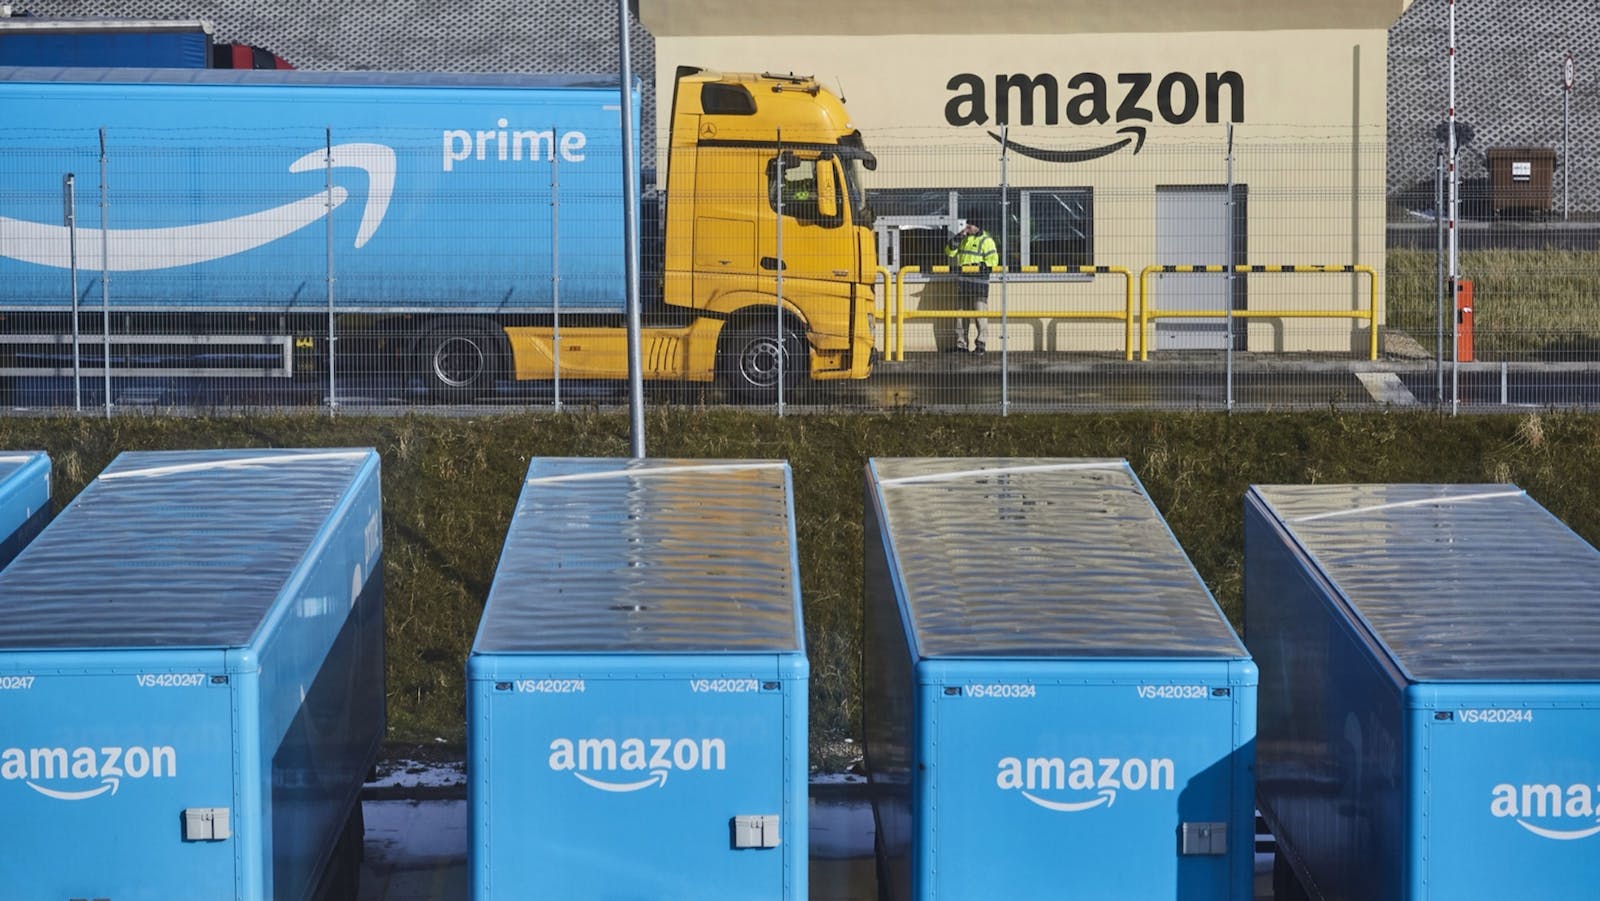 Amazon trailers at the entrance to an Amazon warehouse in Kolbaskowo, Poland, in 2018. Photo by Bloomberg